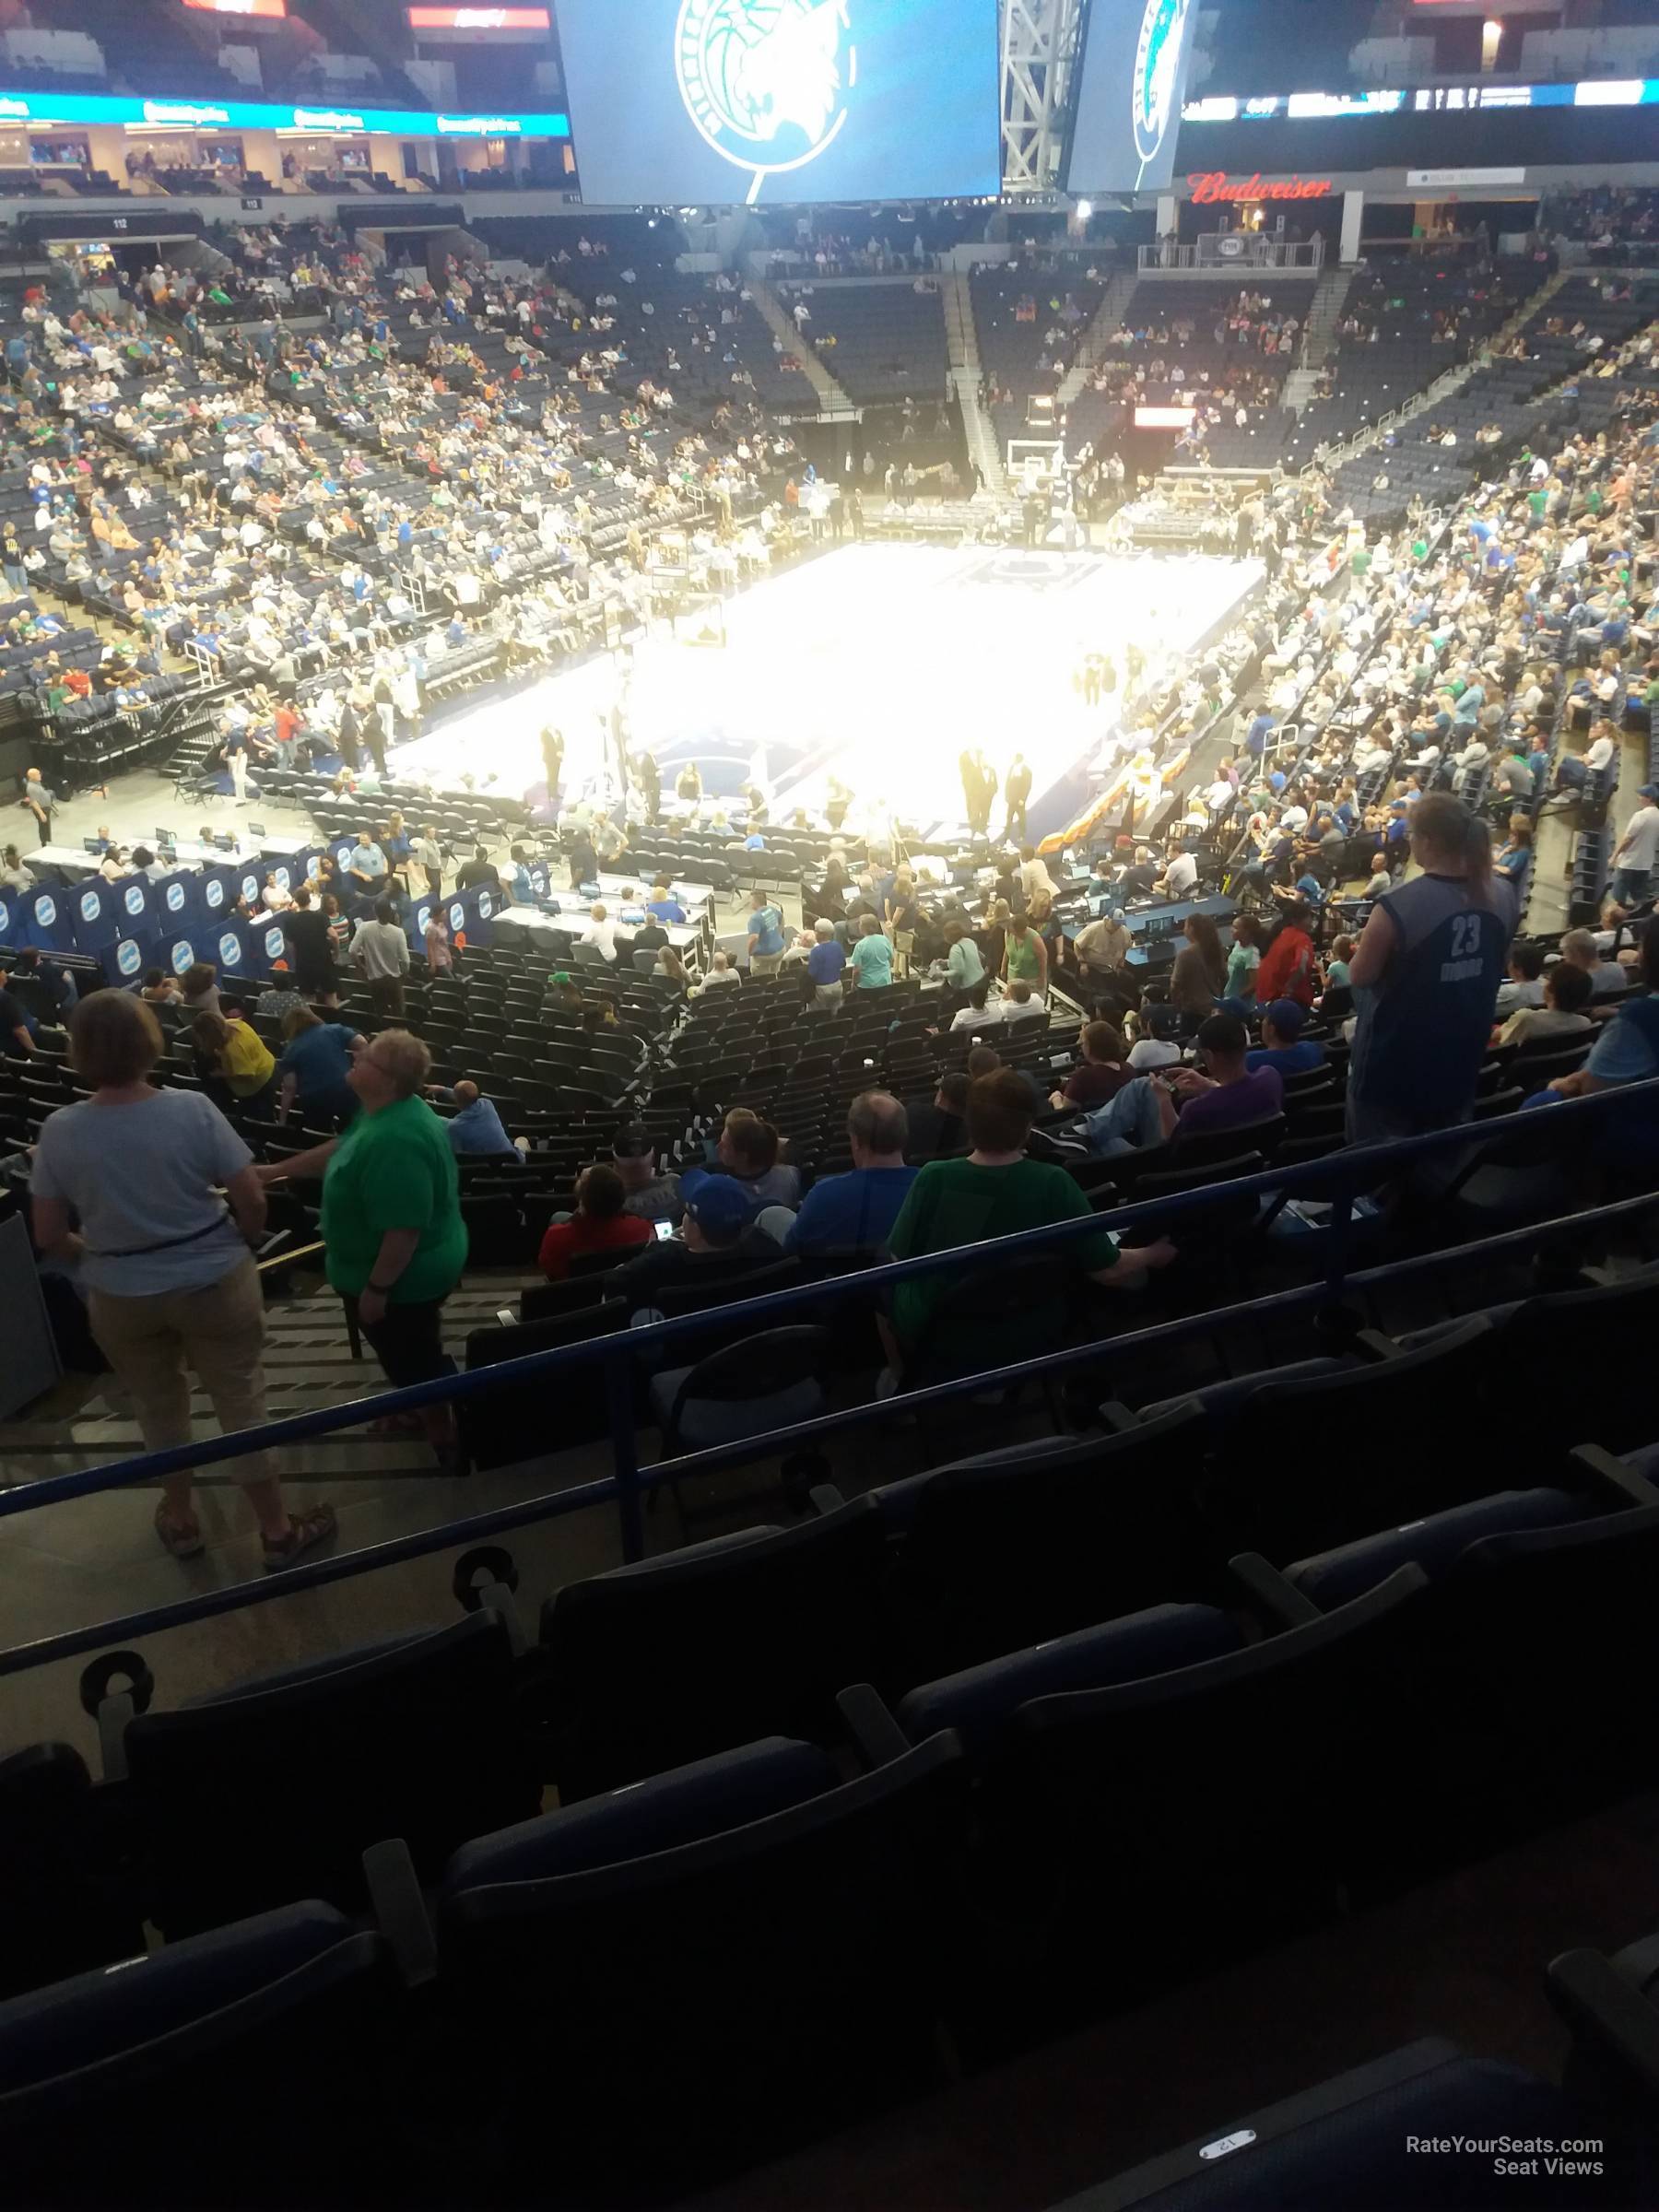 section 138, row z seat view  for basketball - target center